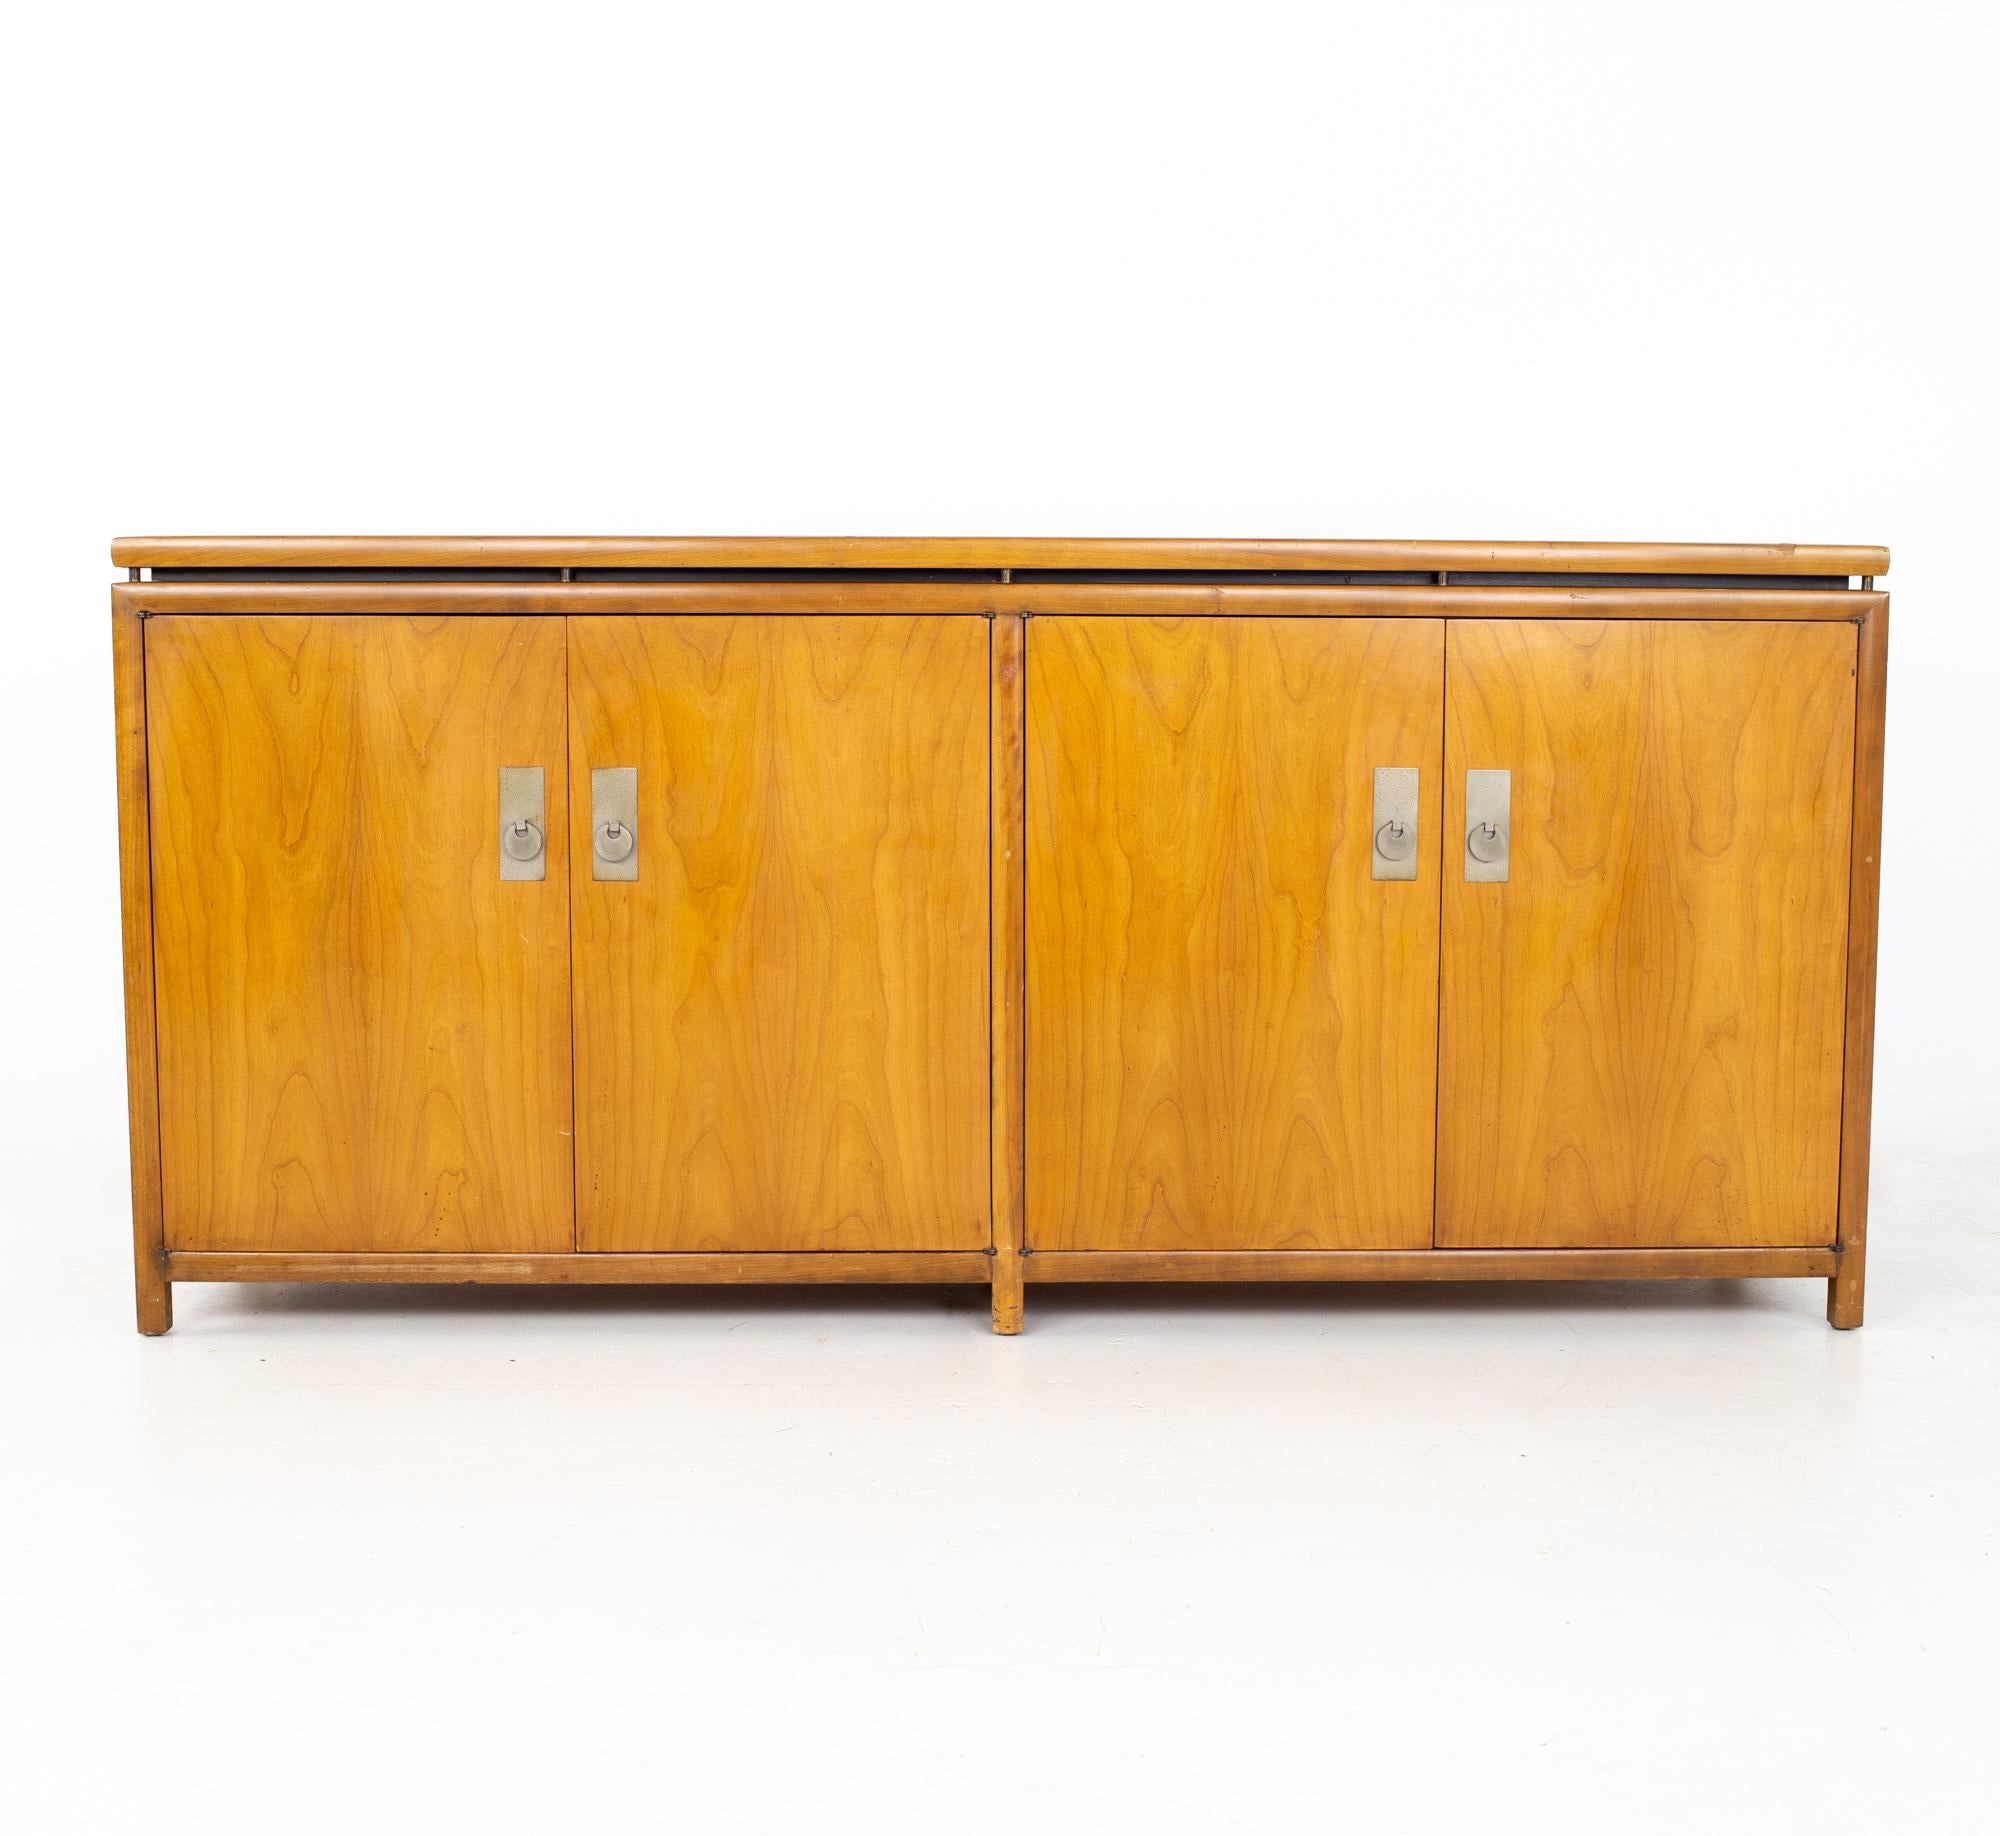 Michael Taylor for Baker New World Collection mid century sideboard buffet credenza

Credenza measures: 74 wide x 18.75 deep x 34 inches high

All pieces of furniture can be had in what we call restored vintage condition. That means the piece is